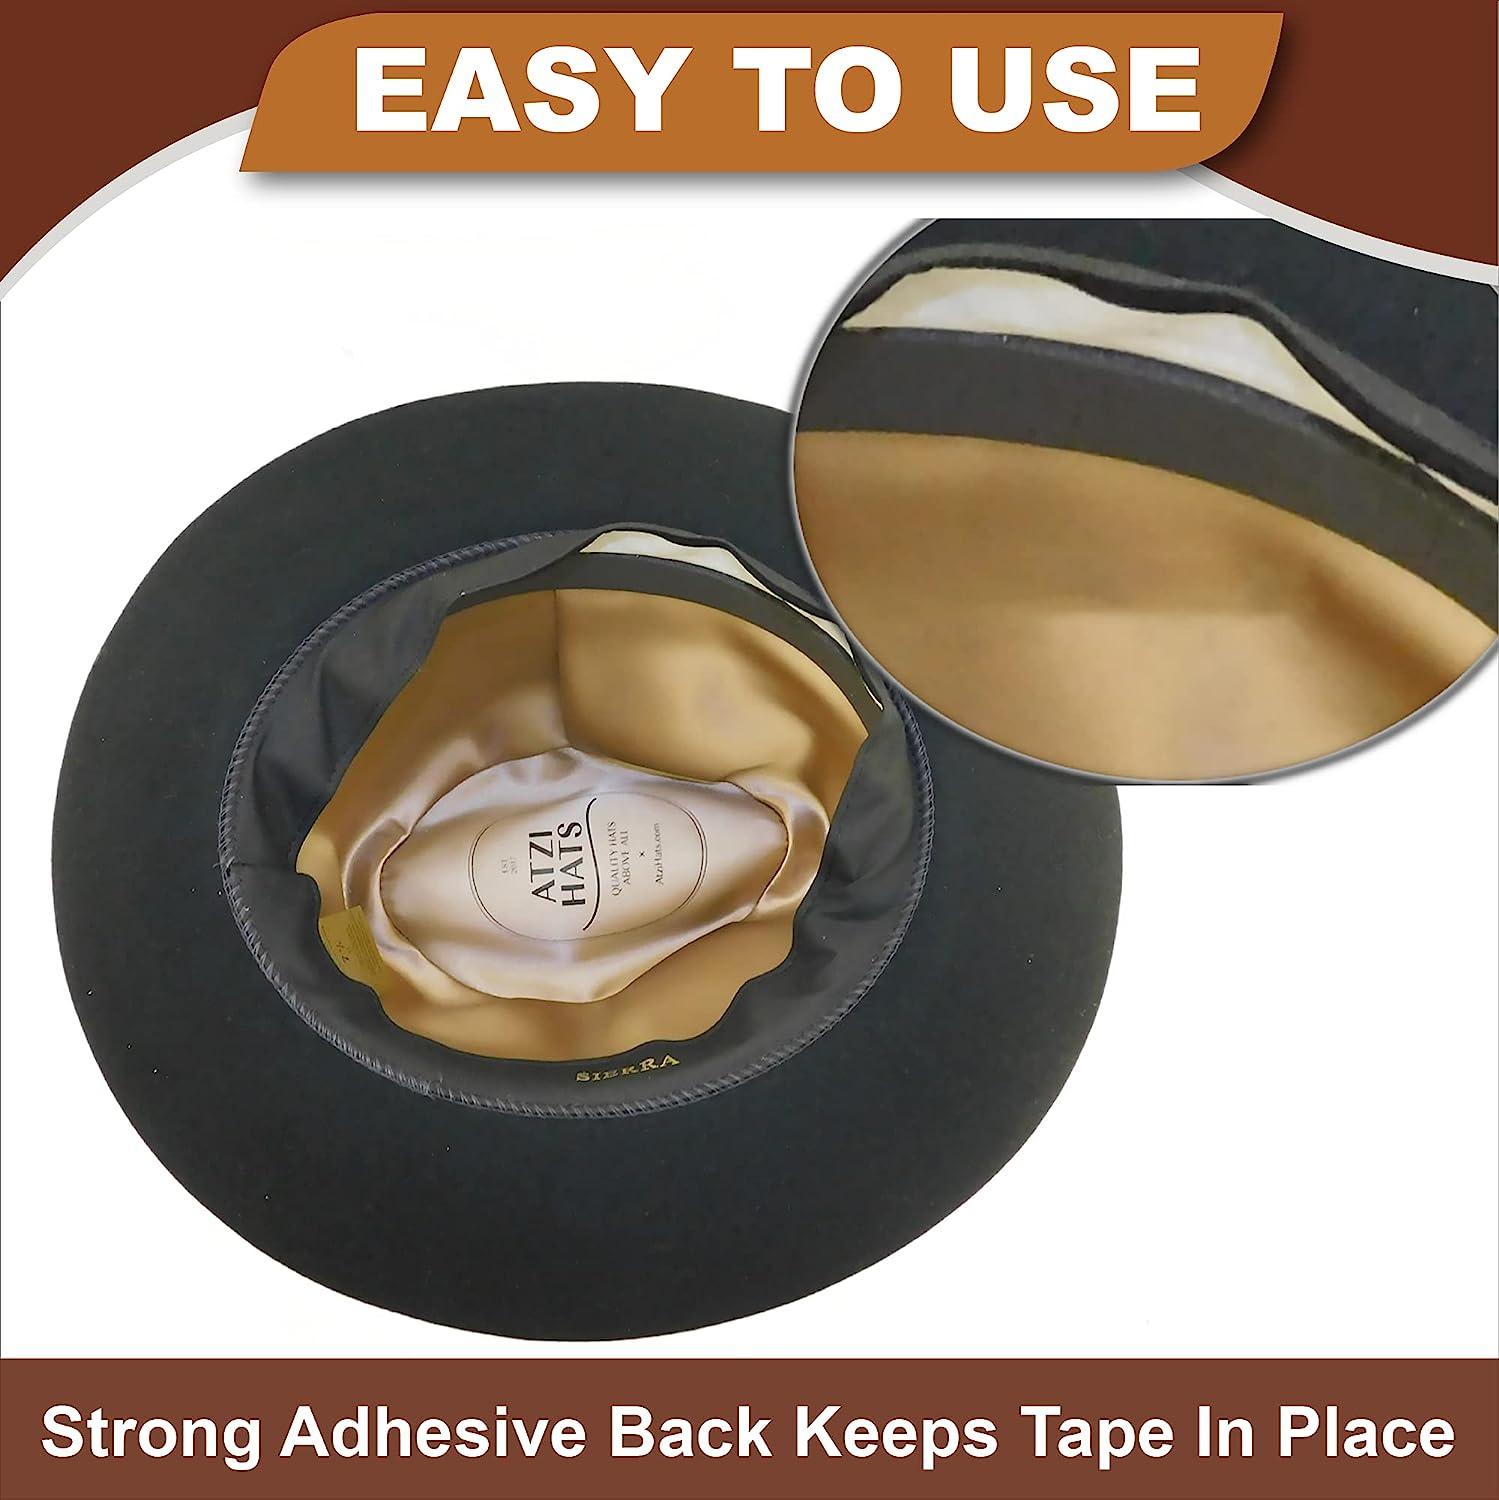 How to use hat size reducer tape?